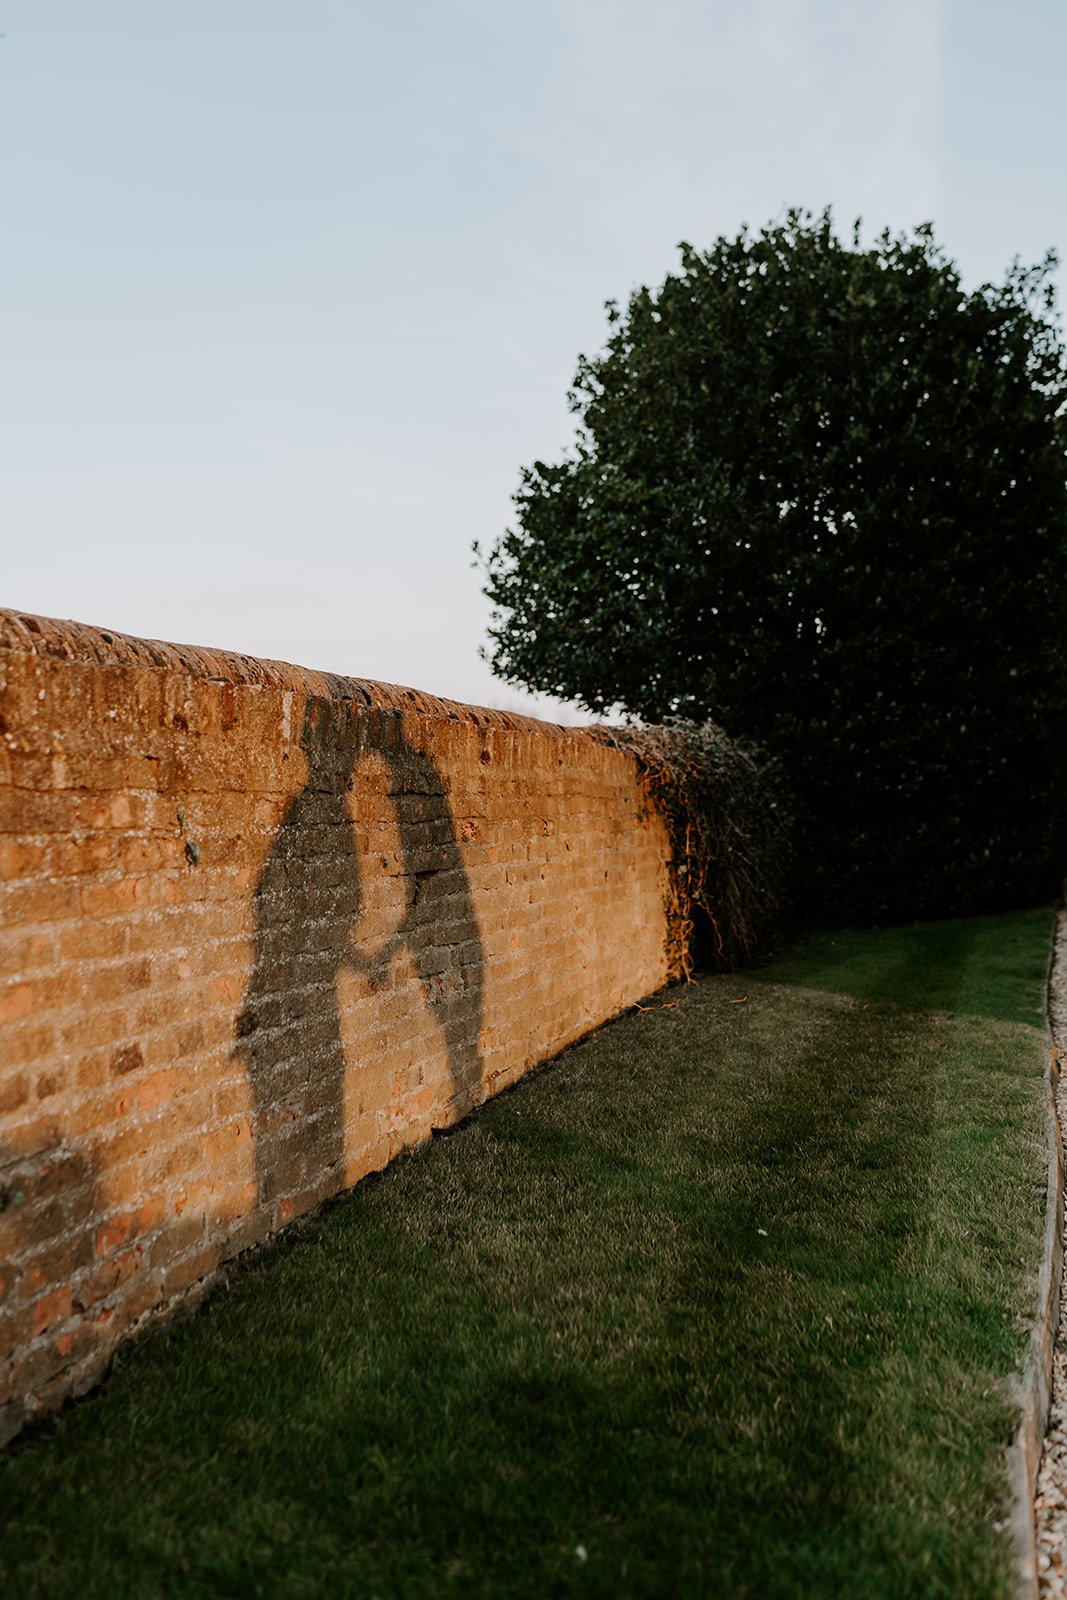 shadow of bride and groom kissing on stone brick wall during golden hour